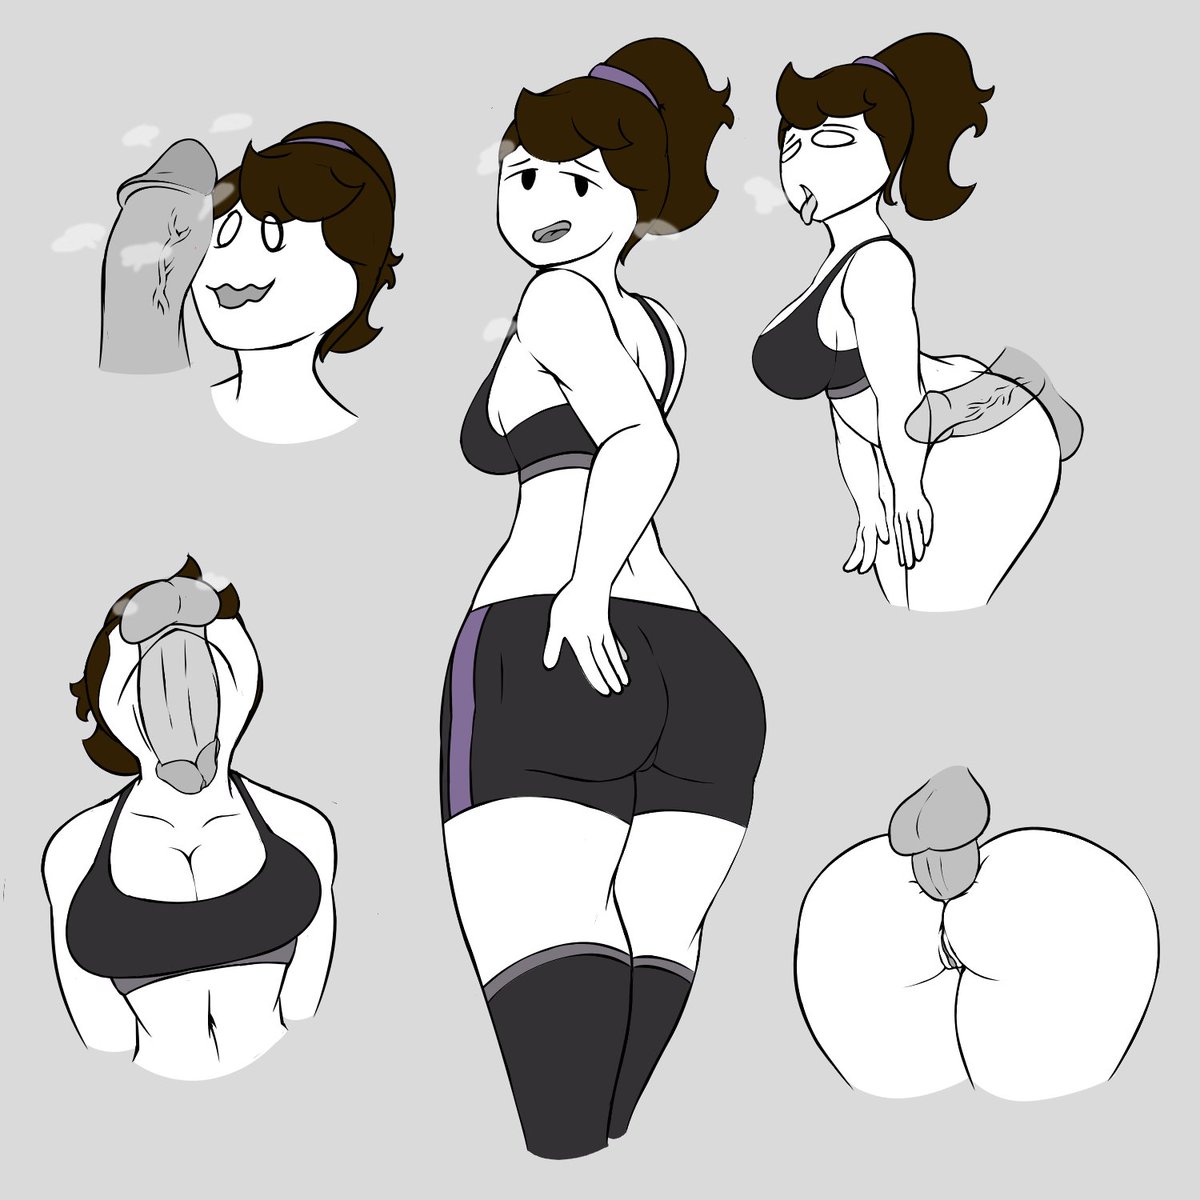 Here's a Jaiden, You can thank @SSSir8 for inspiring me to make this ,...